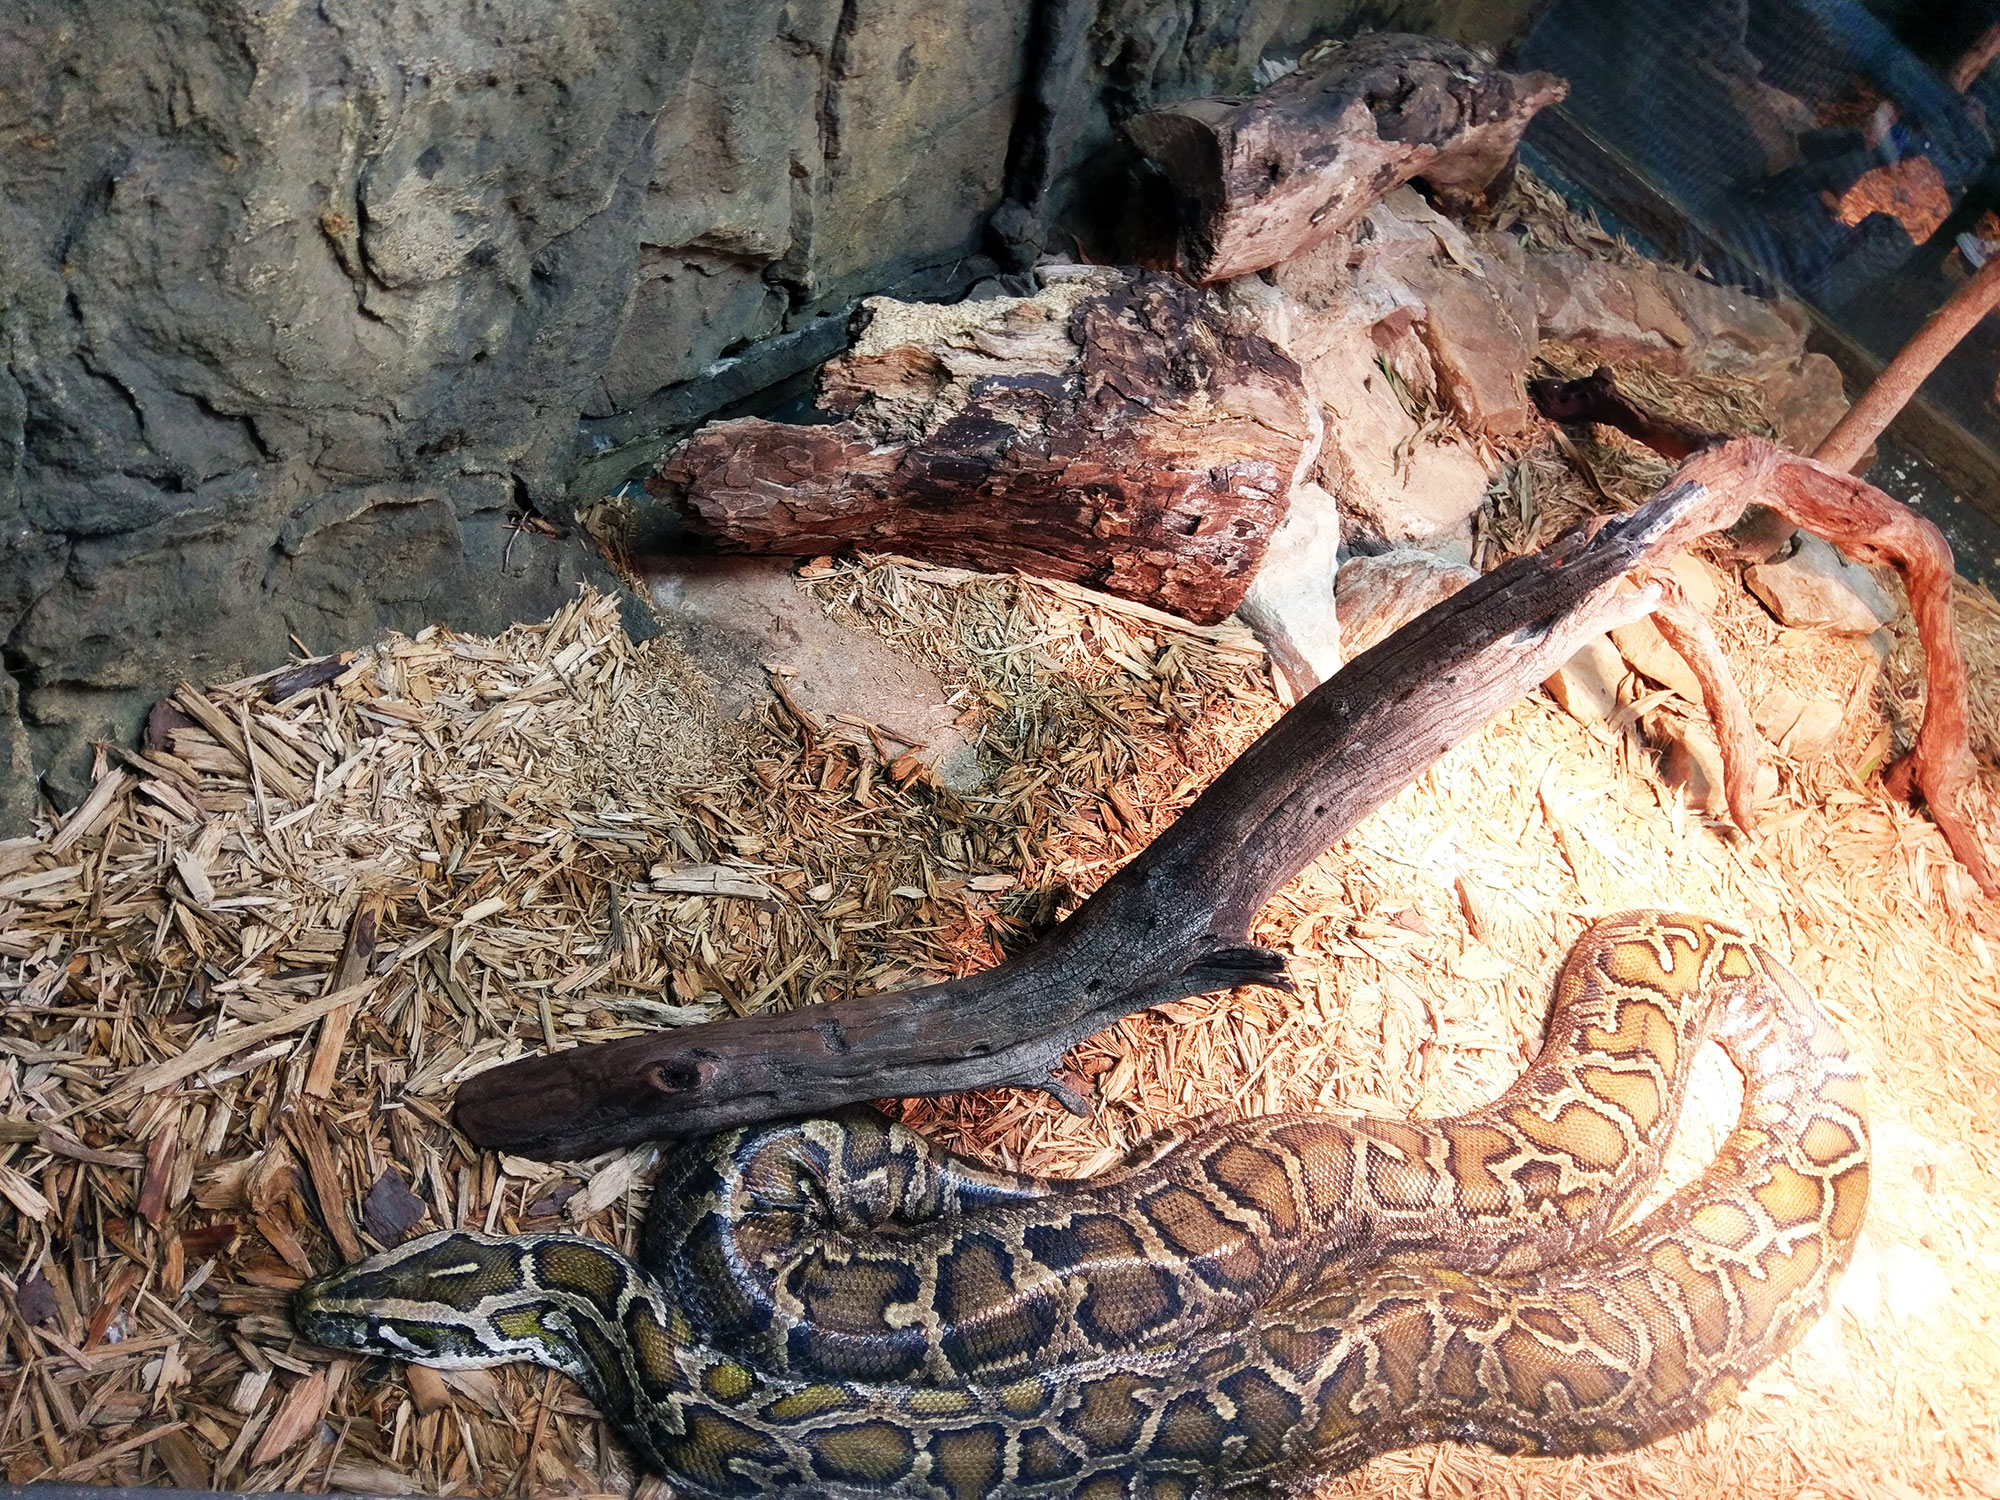 One of many long snakes at the Dallas Zoo.